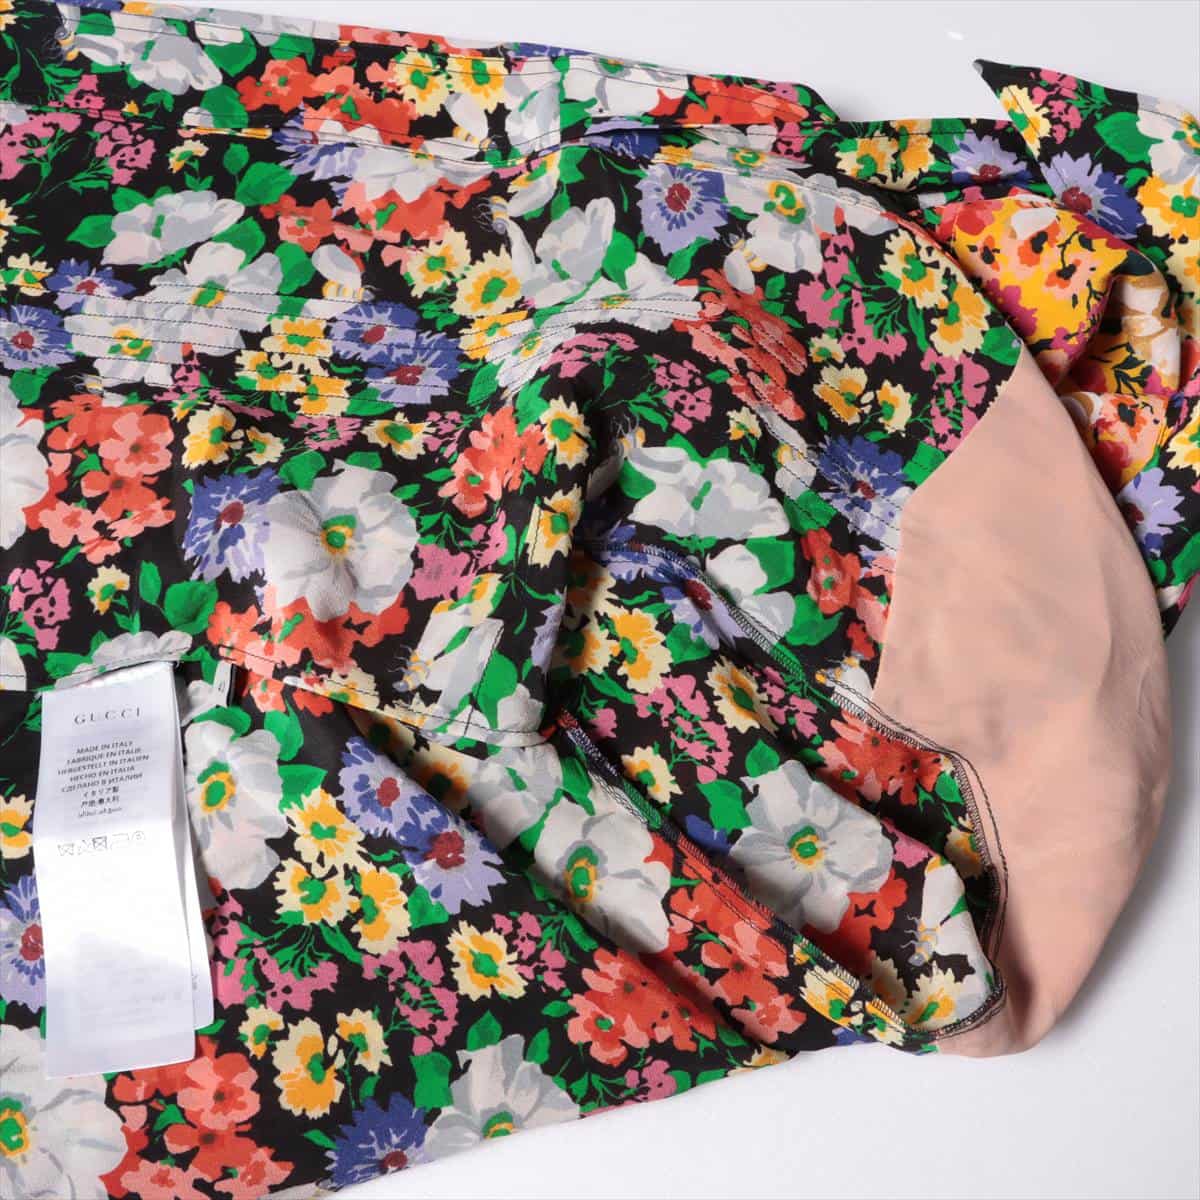 Gucci 17 years Silk Blouse 40 Ladies' Multicolor  498638 floral Bowtie